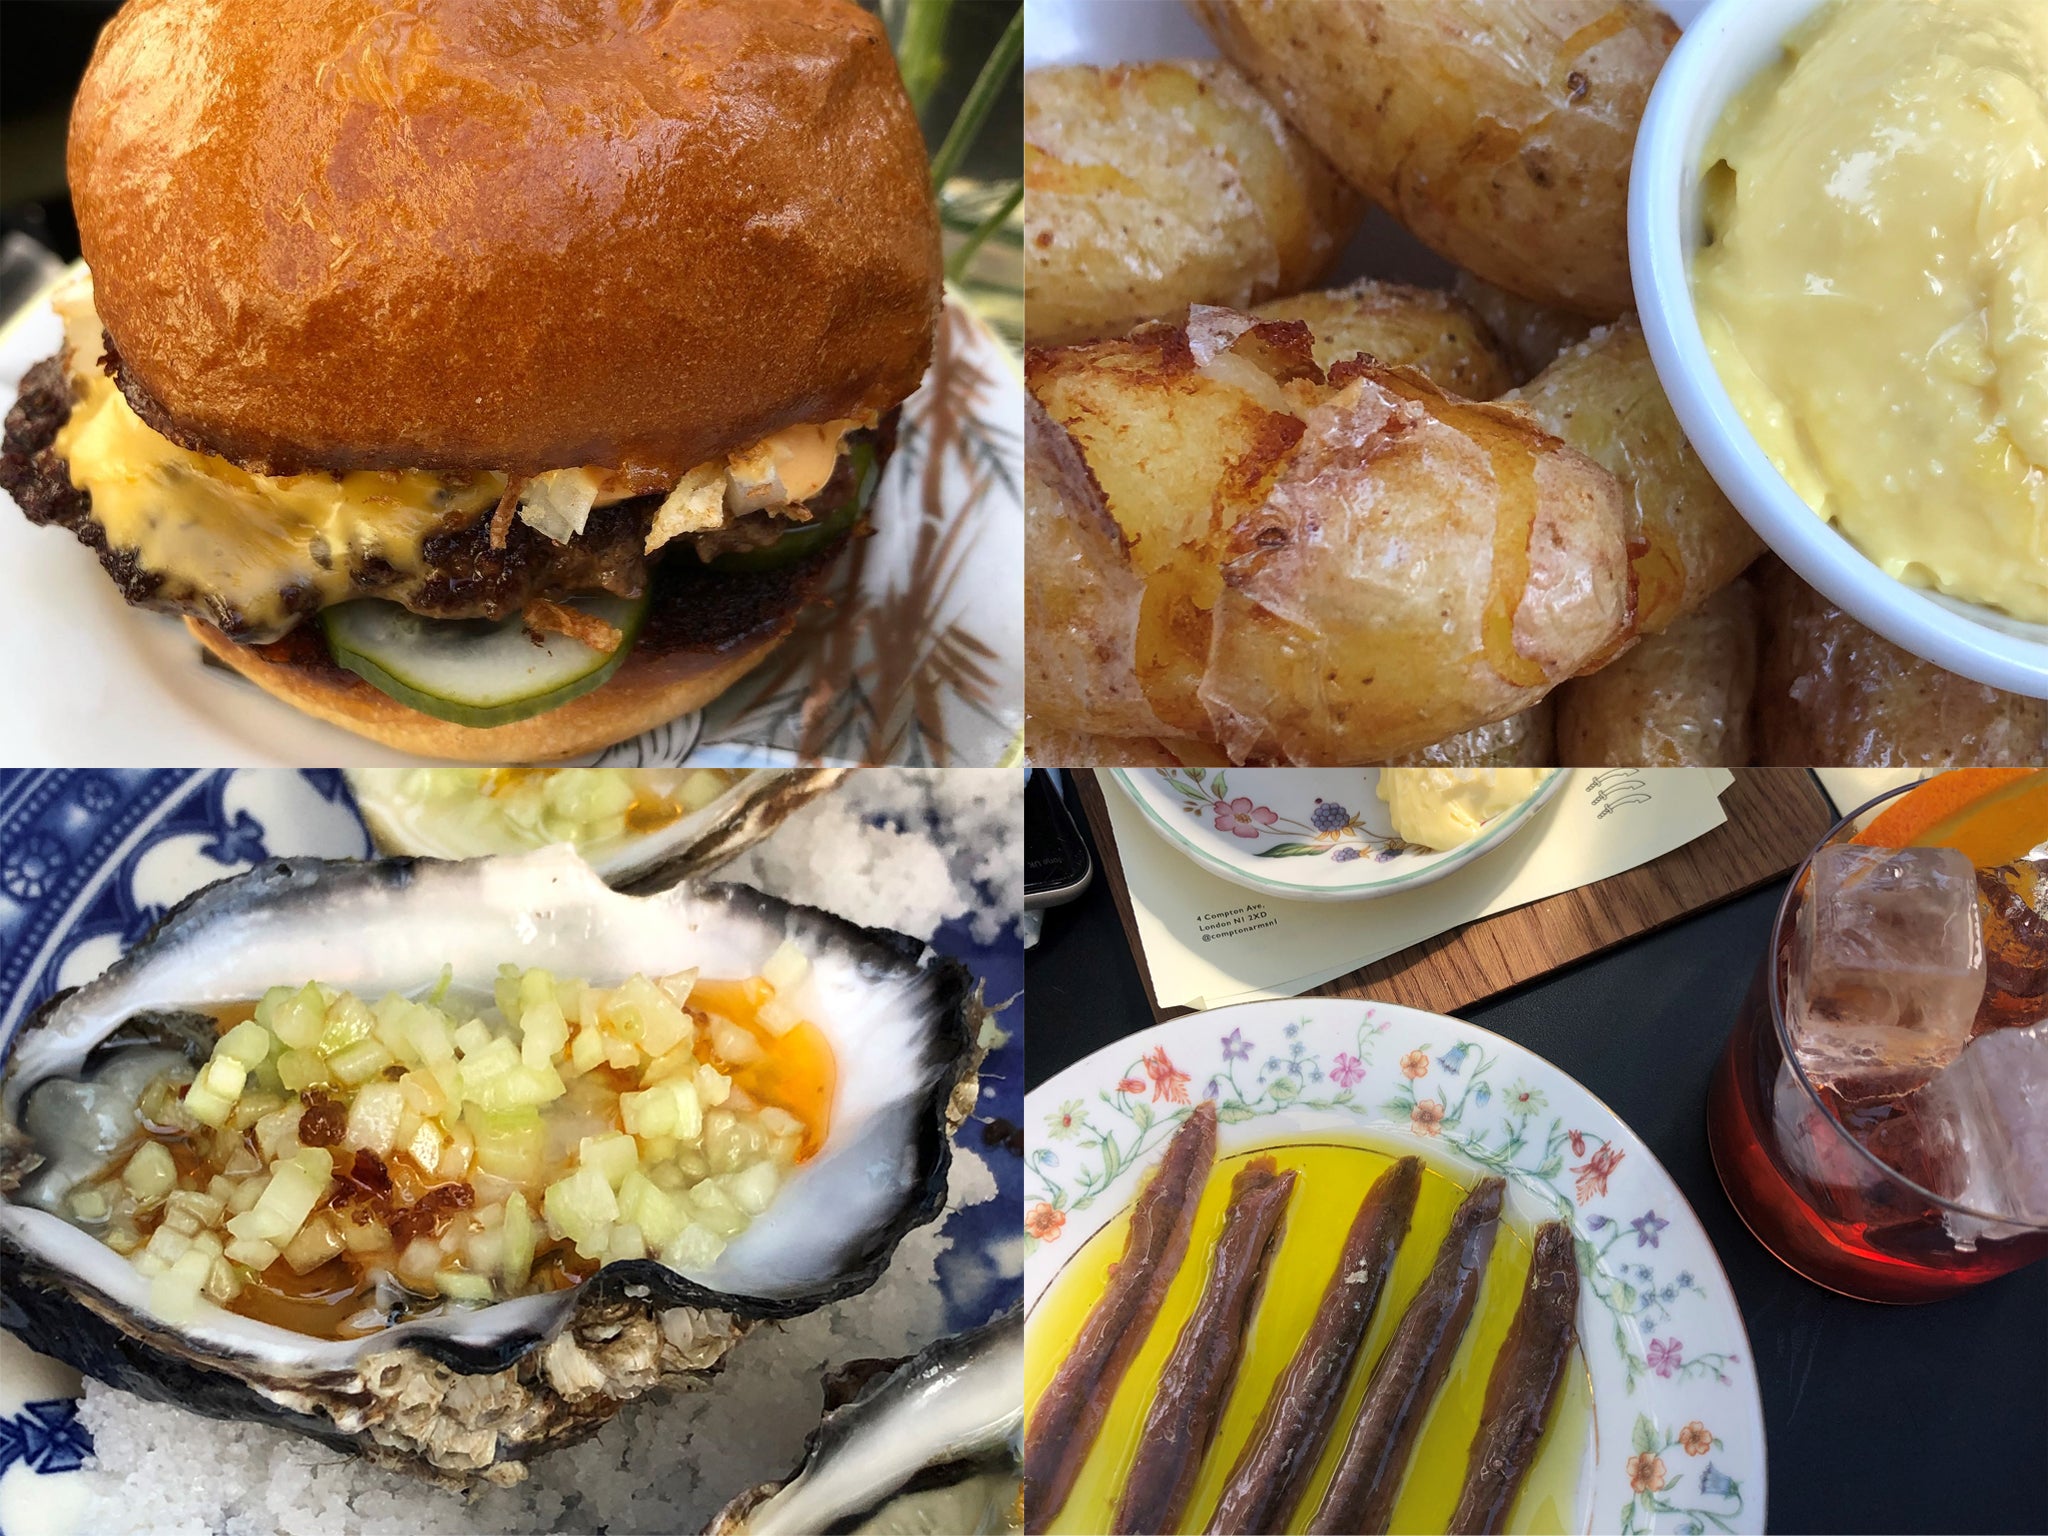 Clockwise from right: the Dexter cheeseburger; fried potatoes with aioli; sourdough, mezcal negroni and Cantabrian anchovies; oysters